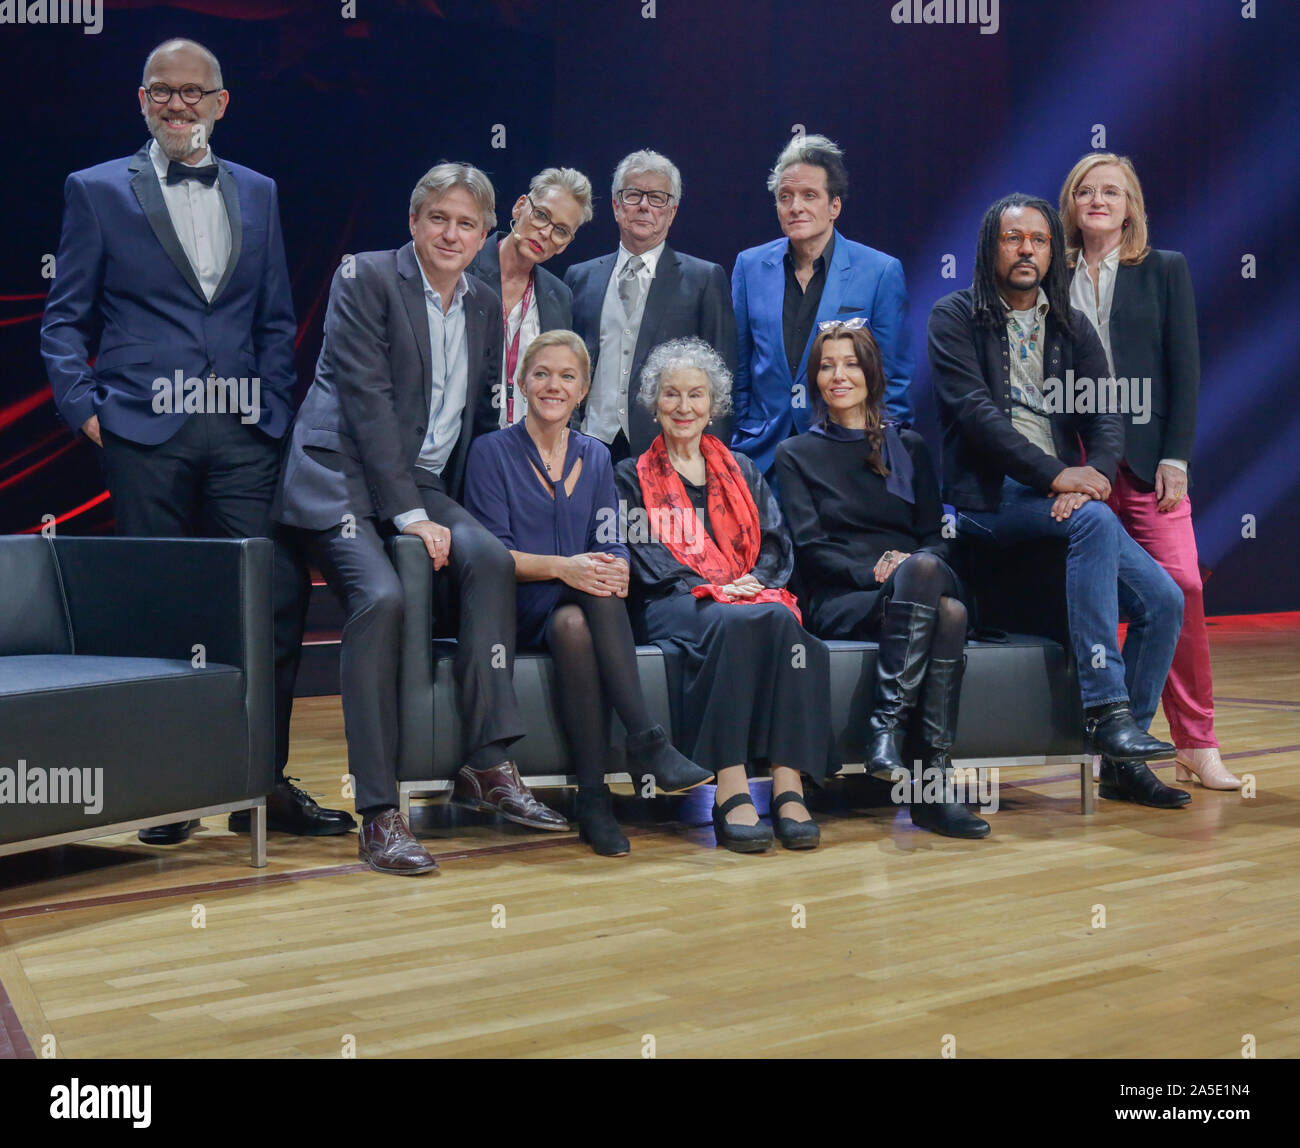 Frankfurt, Germany. 19th Oct, 2019. Juergen Boos, Maja Lunde, Margaret Atwood, Elif Shafak and Colson Whitehead (sitting left to right) and Thomas Böhm, Bärbel Schäfer, Ken Follett, Bela B Felsenheimer and Nina Petri (standing left to right) are pictured at a photo call at the Frankfurt Book Fair. The 71th Frankfurt Book Fair 2019 is the world largest book fair with over 7,500 exhibitors and over 285,000 expected visitors. The Guest of Honour for the 2019 fair is Norway. (Photo by Michael Debets/Pacific Press) Credit: Pacific Press Agency/Alamy Live News Stock Photo